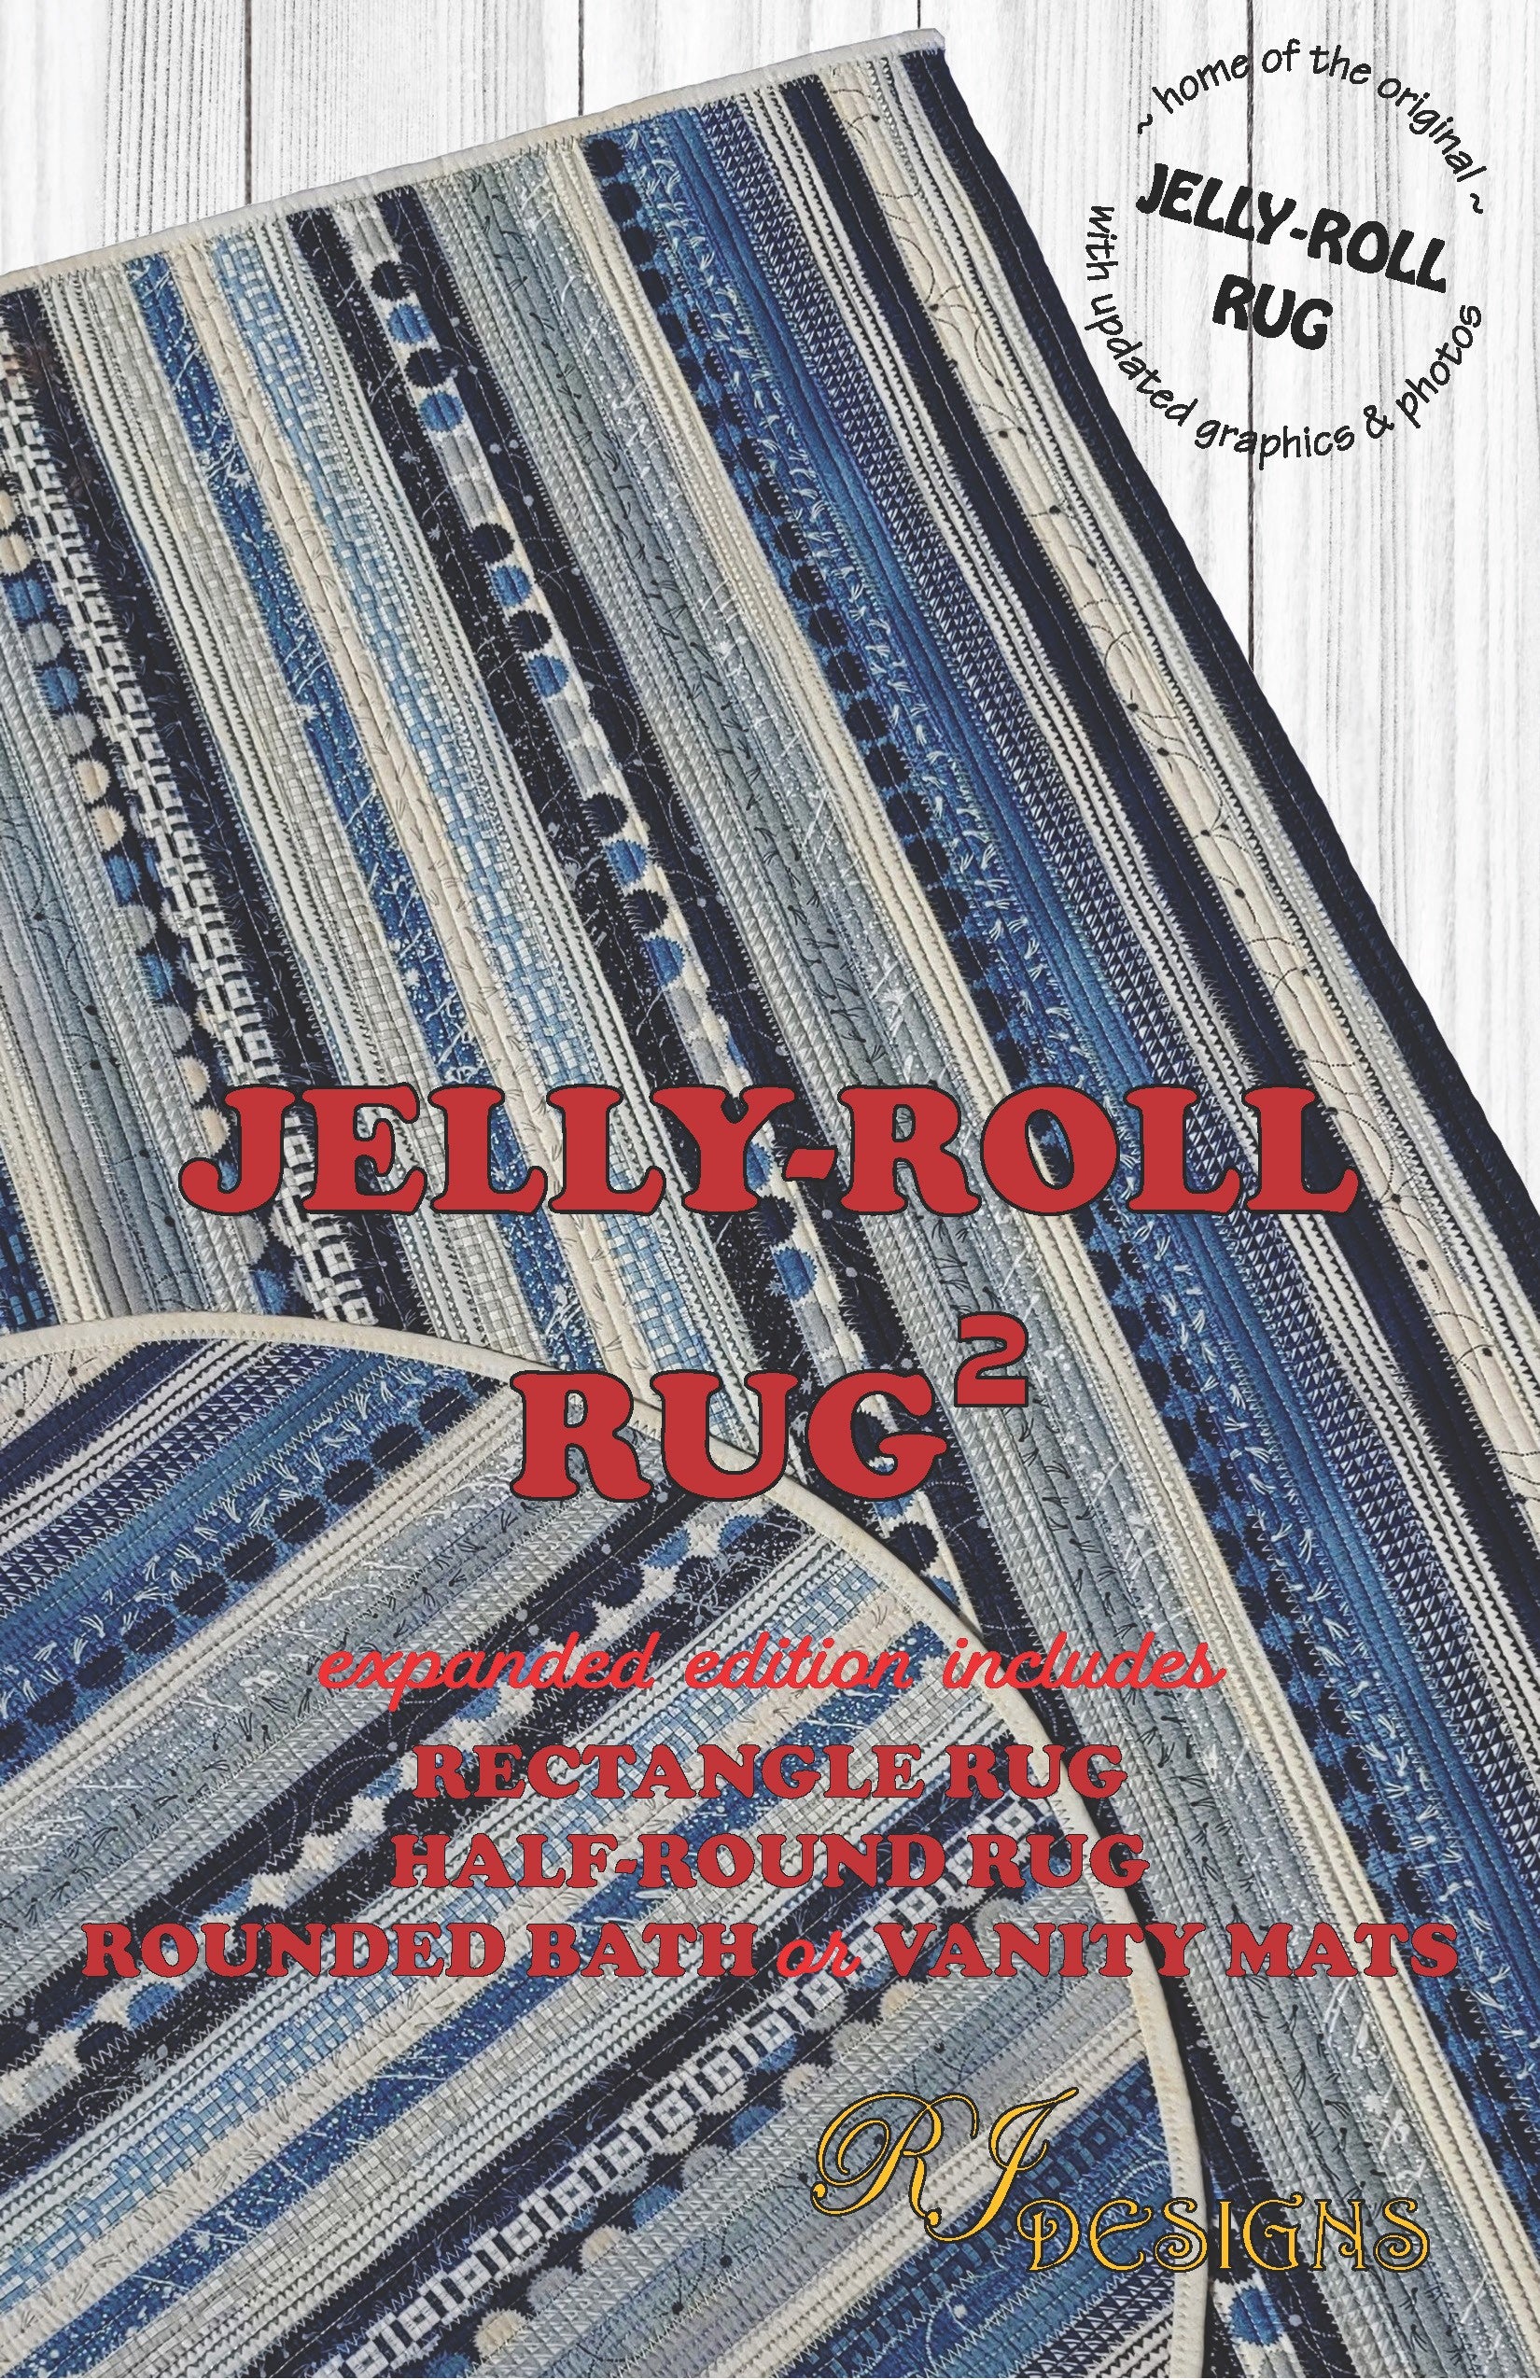 Jelly Roll Rug Squared Rectangle 27-Inch x 44-Inch Sewing Pattern by Roma Lambson of RJ Designs